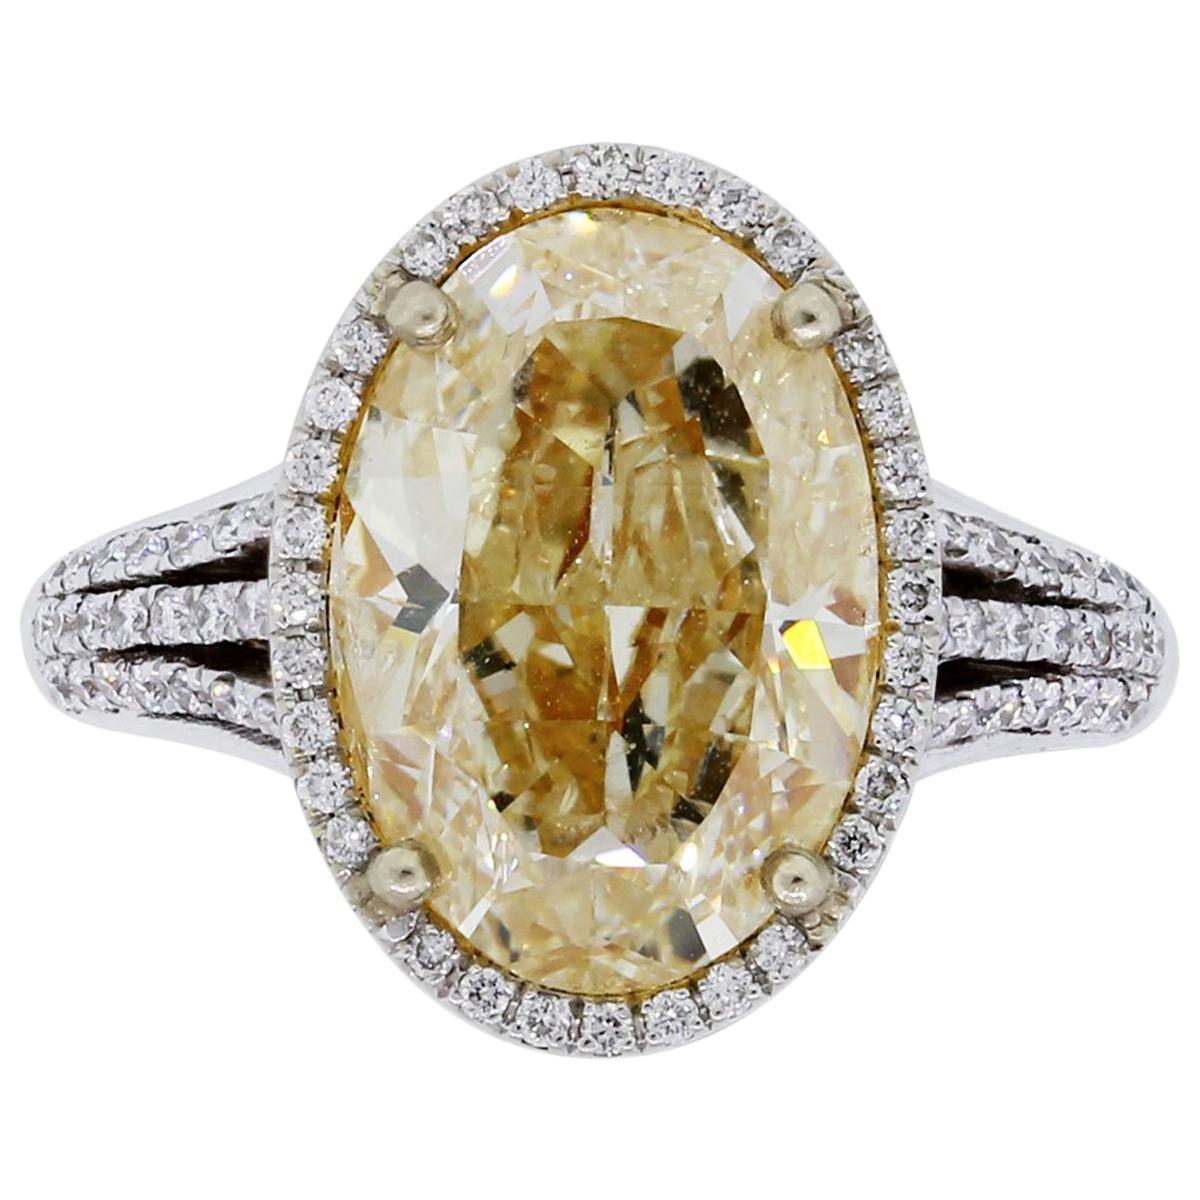 6.34 Carat Fancy Yellow Oval Cut Diamond Engagement Ring For Sale at ...